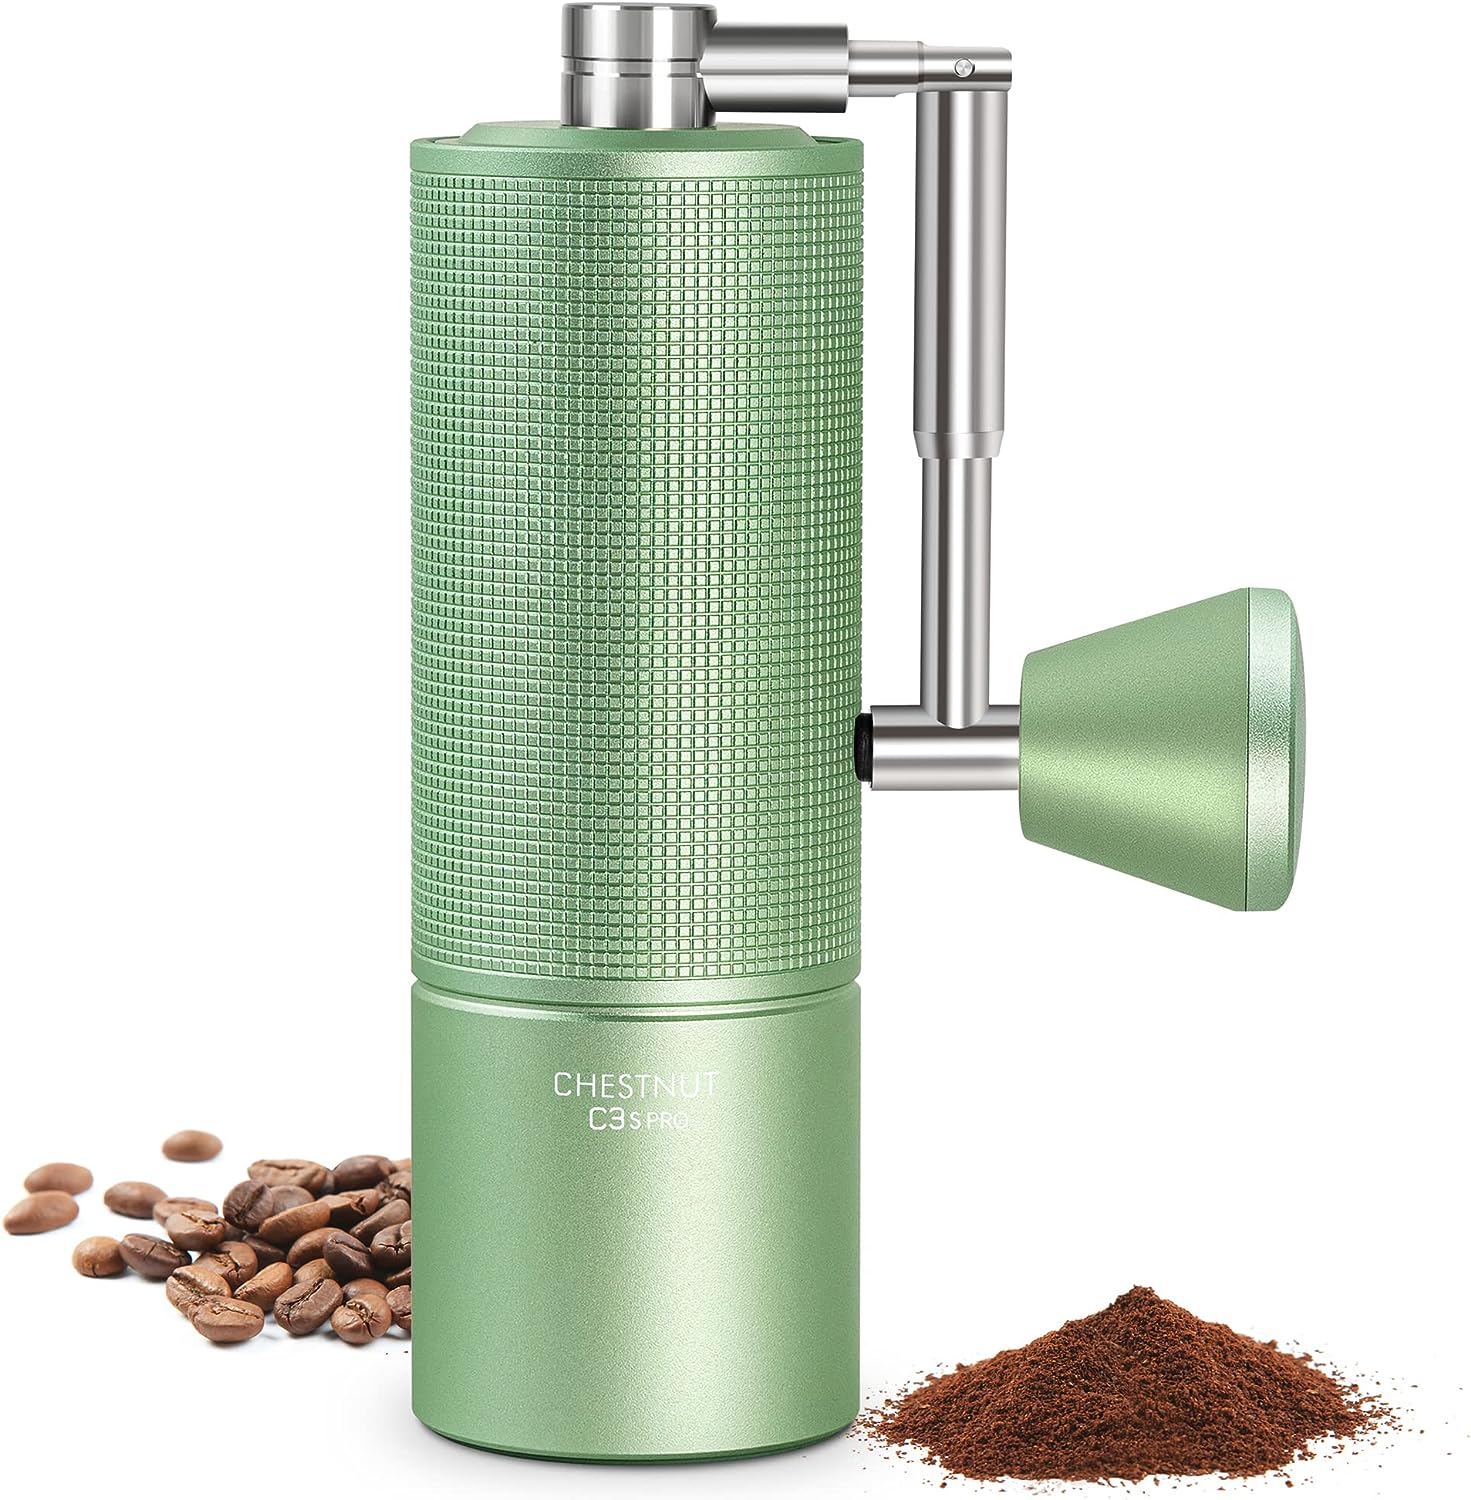 TIMEMORE Chestnut C3s PRO Manual Coffee Grinder, Upgrade Integrated All-Metal Housing, Hand Coffee Grinder with Folding Handle, for Espresso to French Press - Green